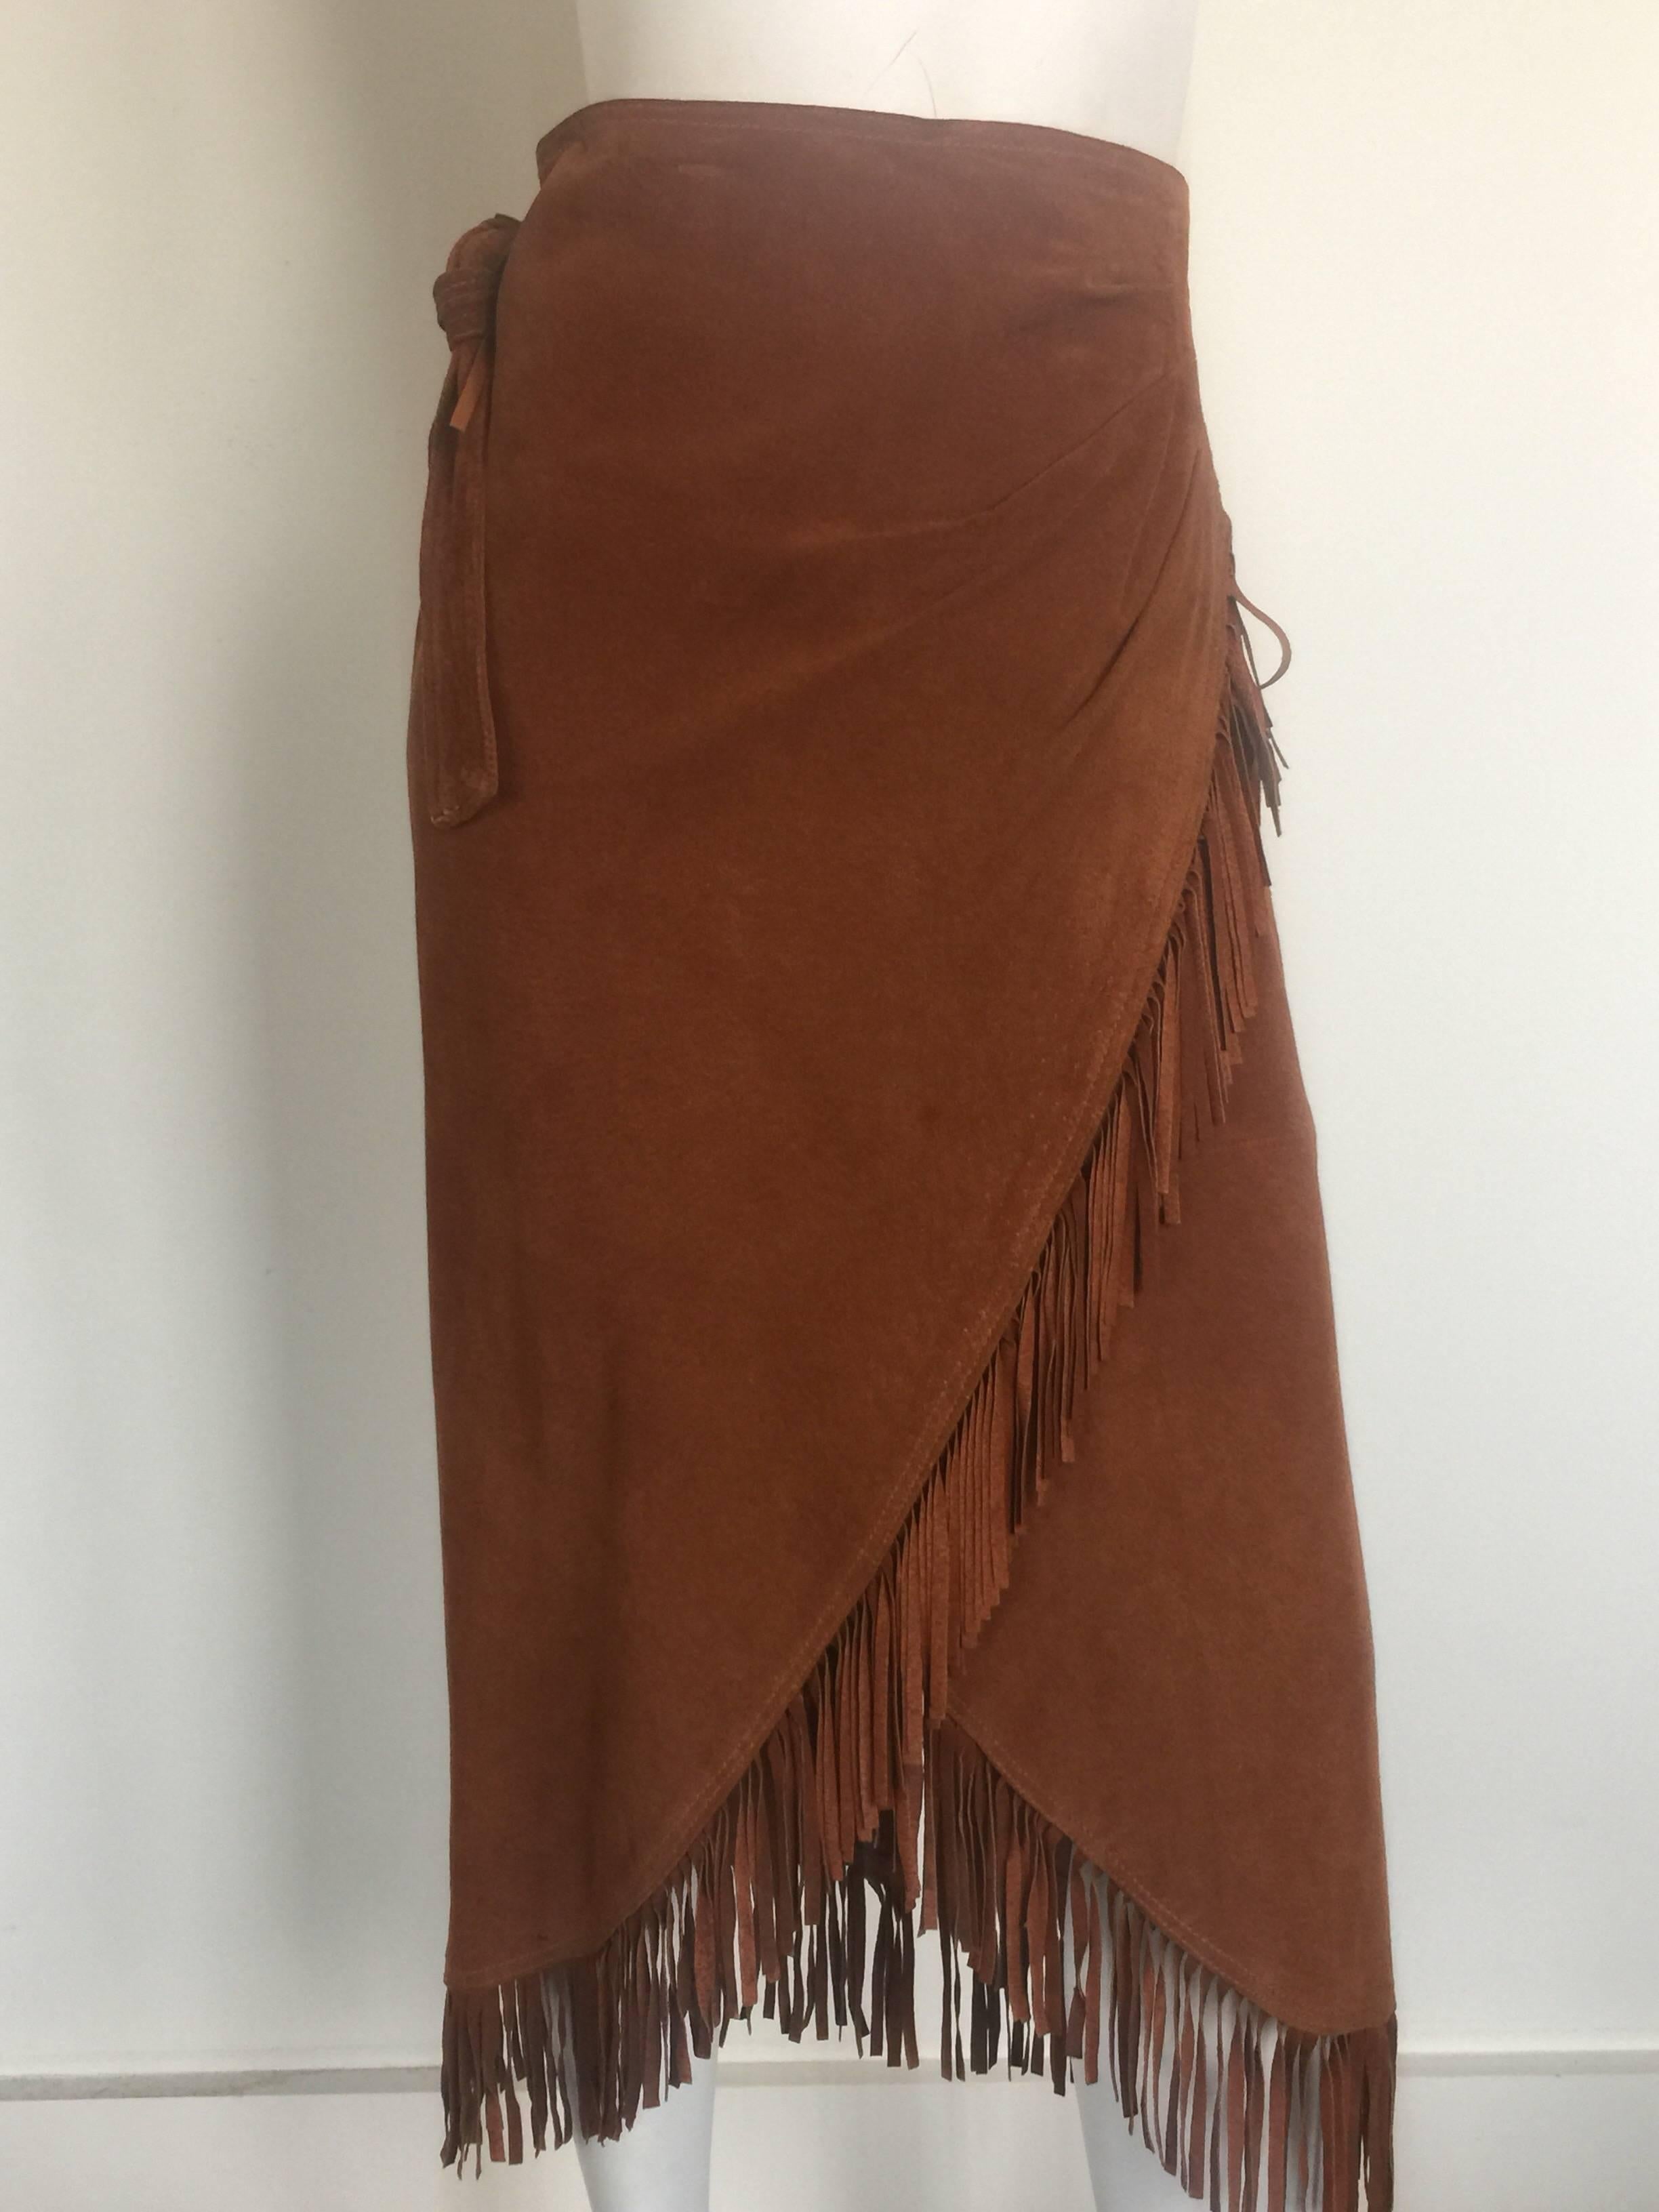 Suede fringe wrap skirt In Good Condition For Sale In New York, NY